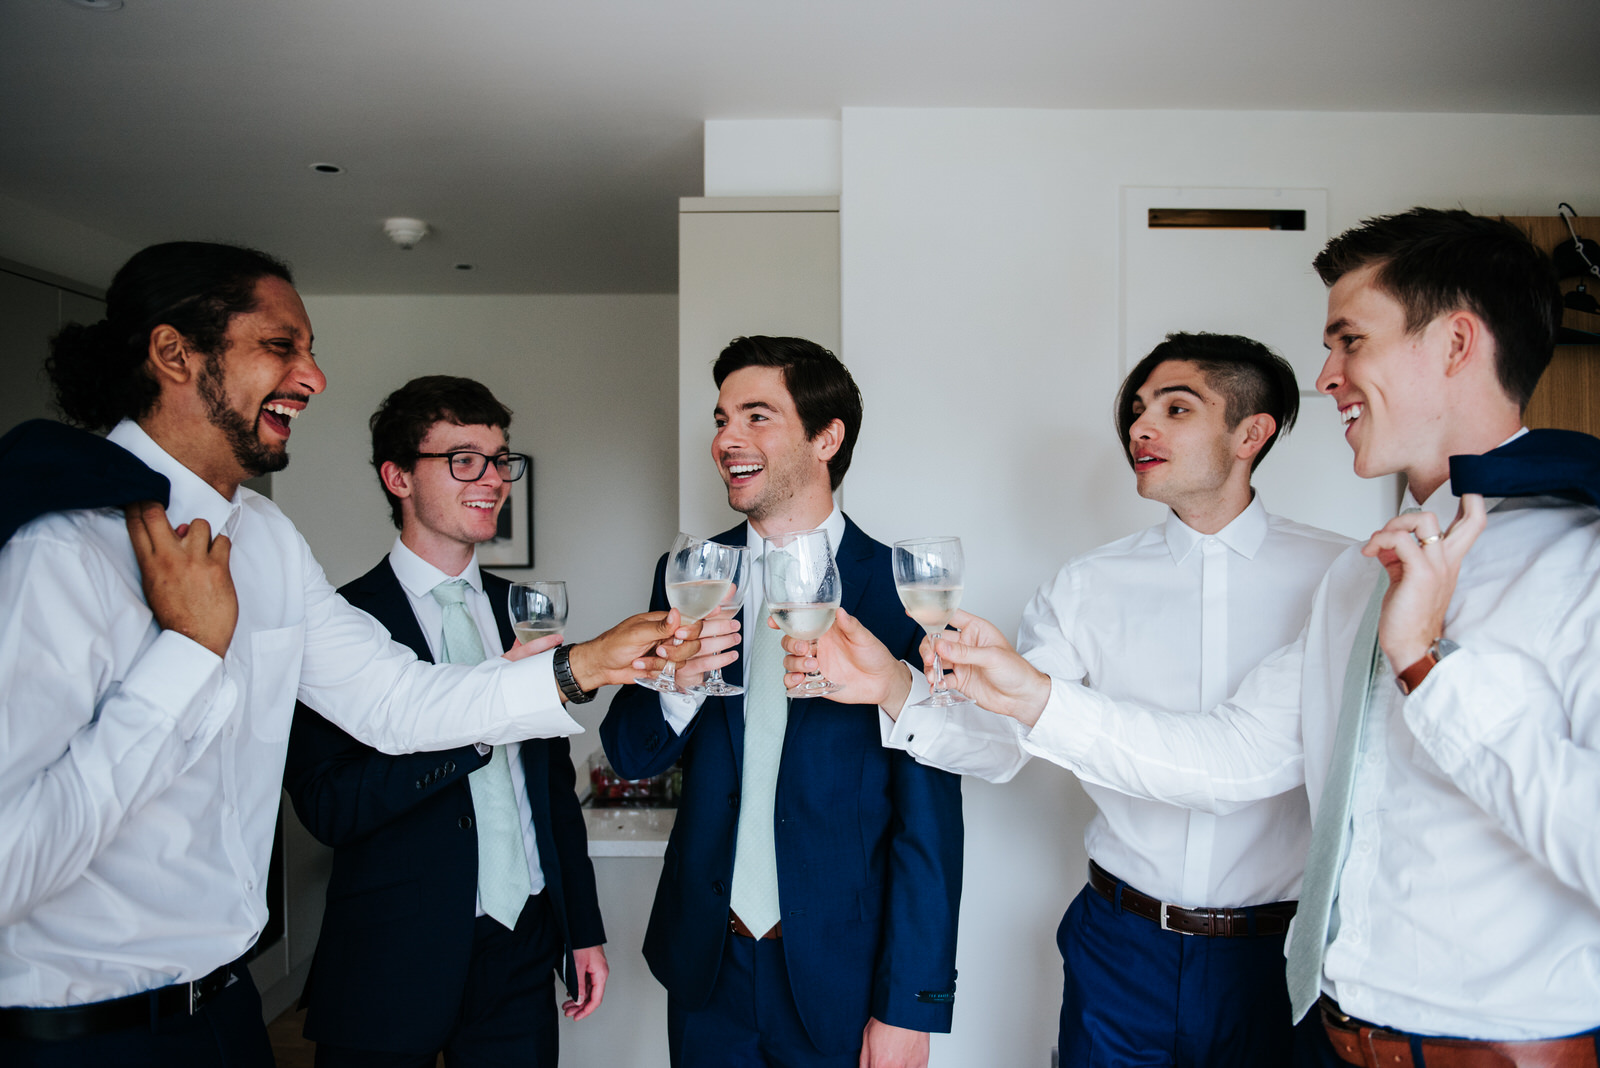 Groom and groomsmen share a toast as they finish getting ready